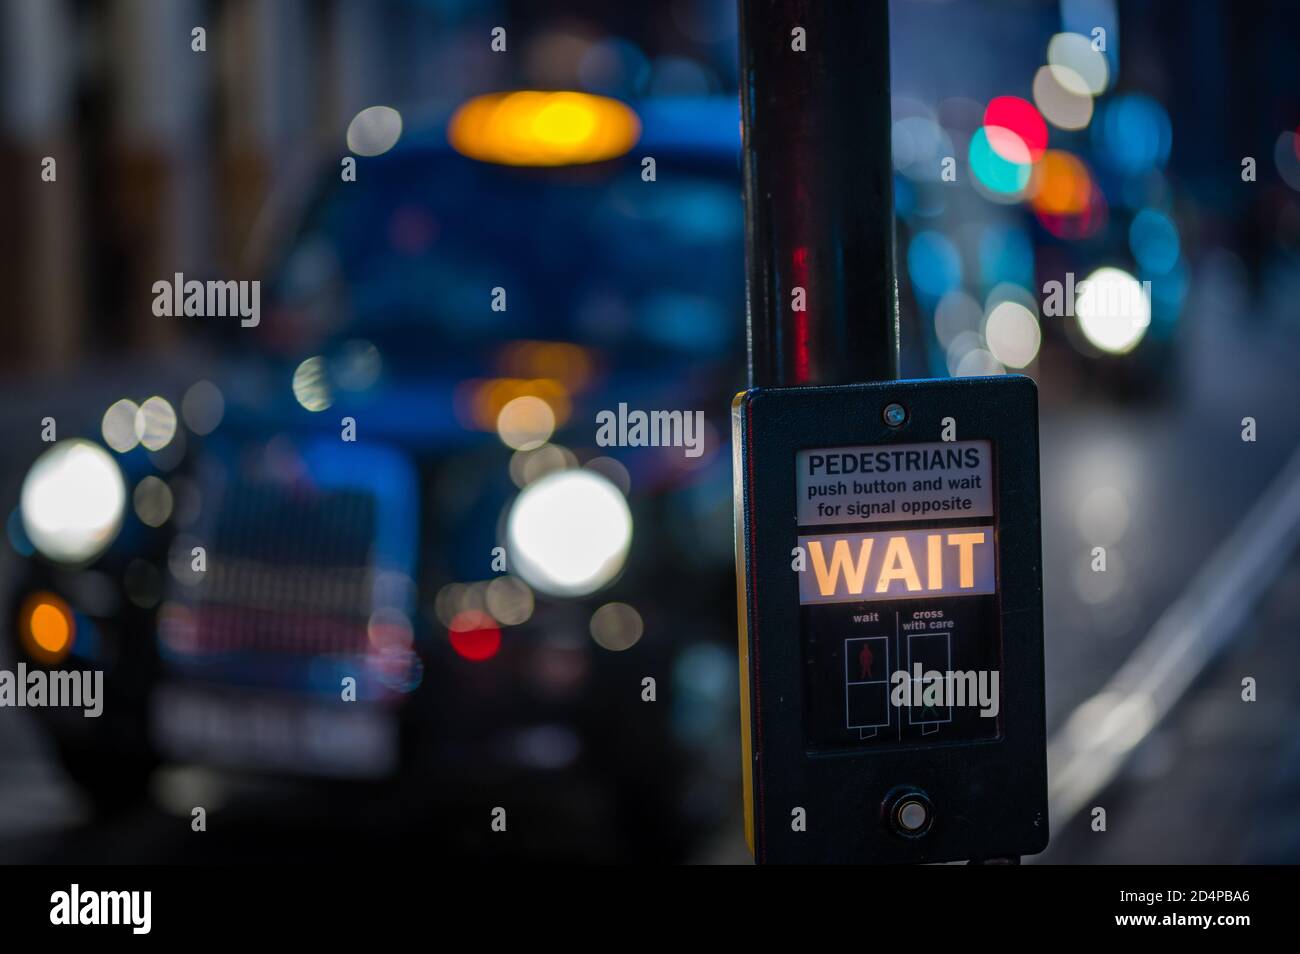 Wait sign on a traffic light stop in London Stock Photo